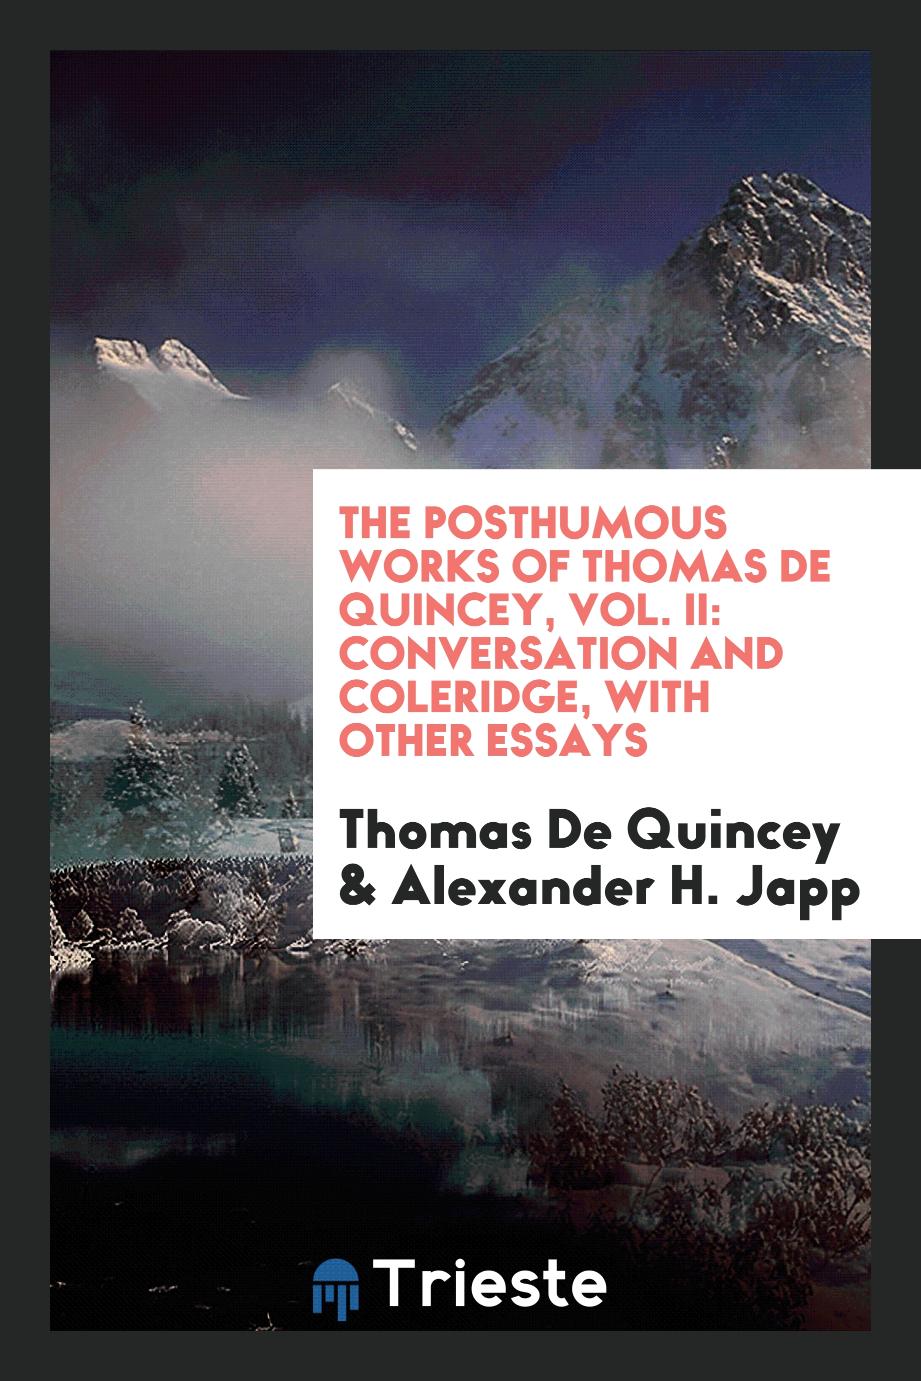 The posthumous works of Thomas De Quincey, Vol. II: Conversation and coleridge, with other essays